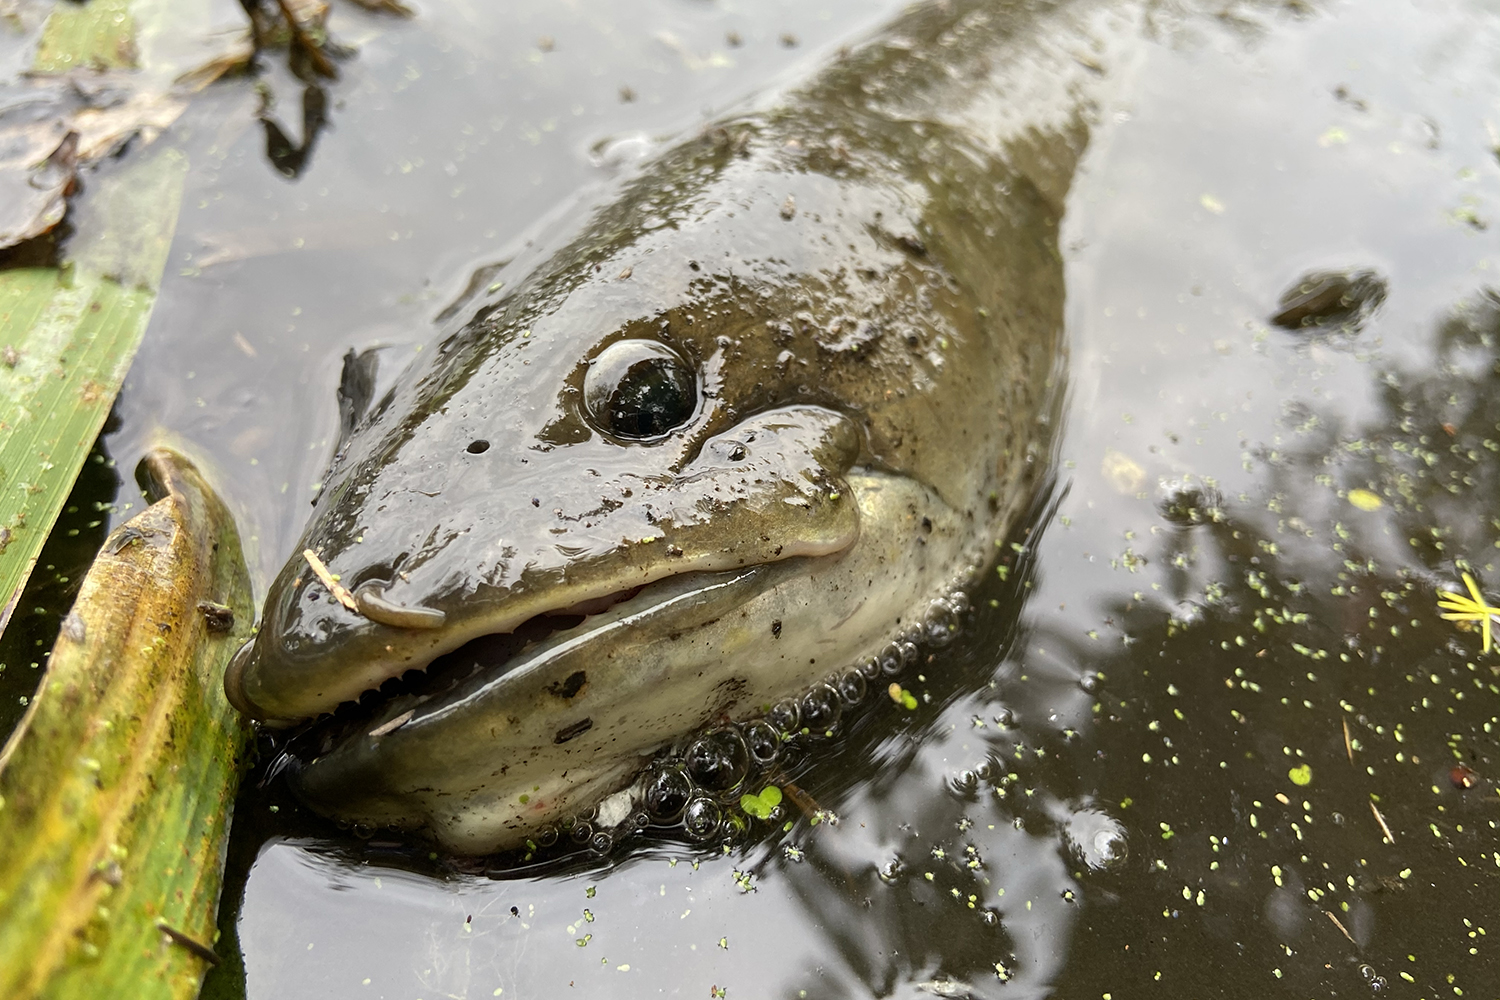 bowfin head sticking up out of muddy water